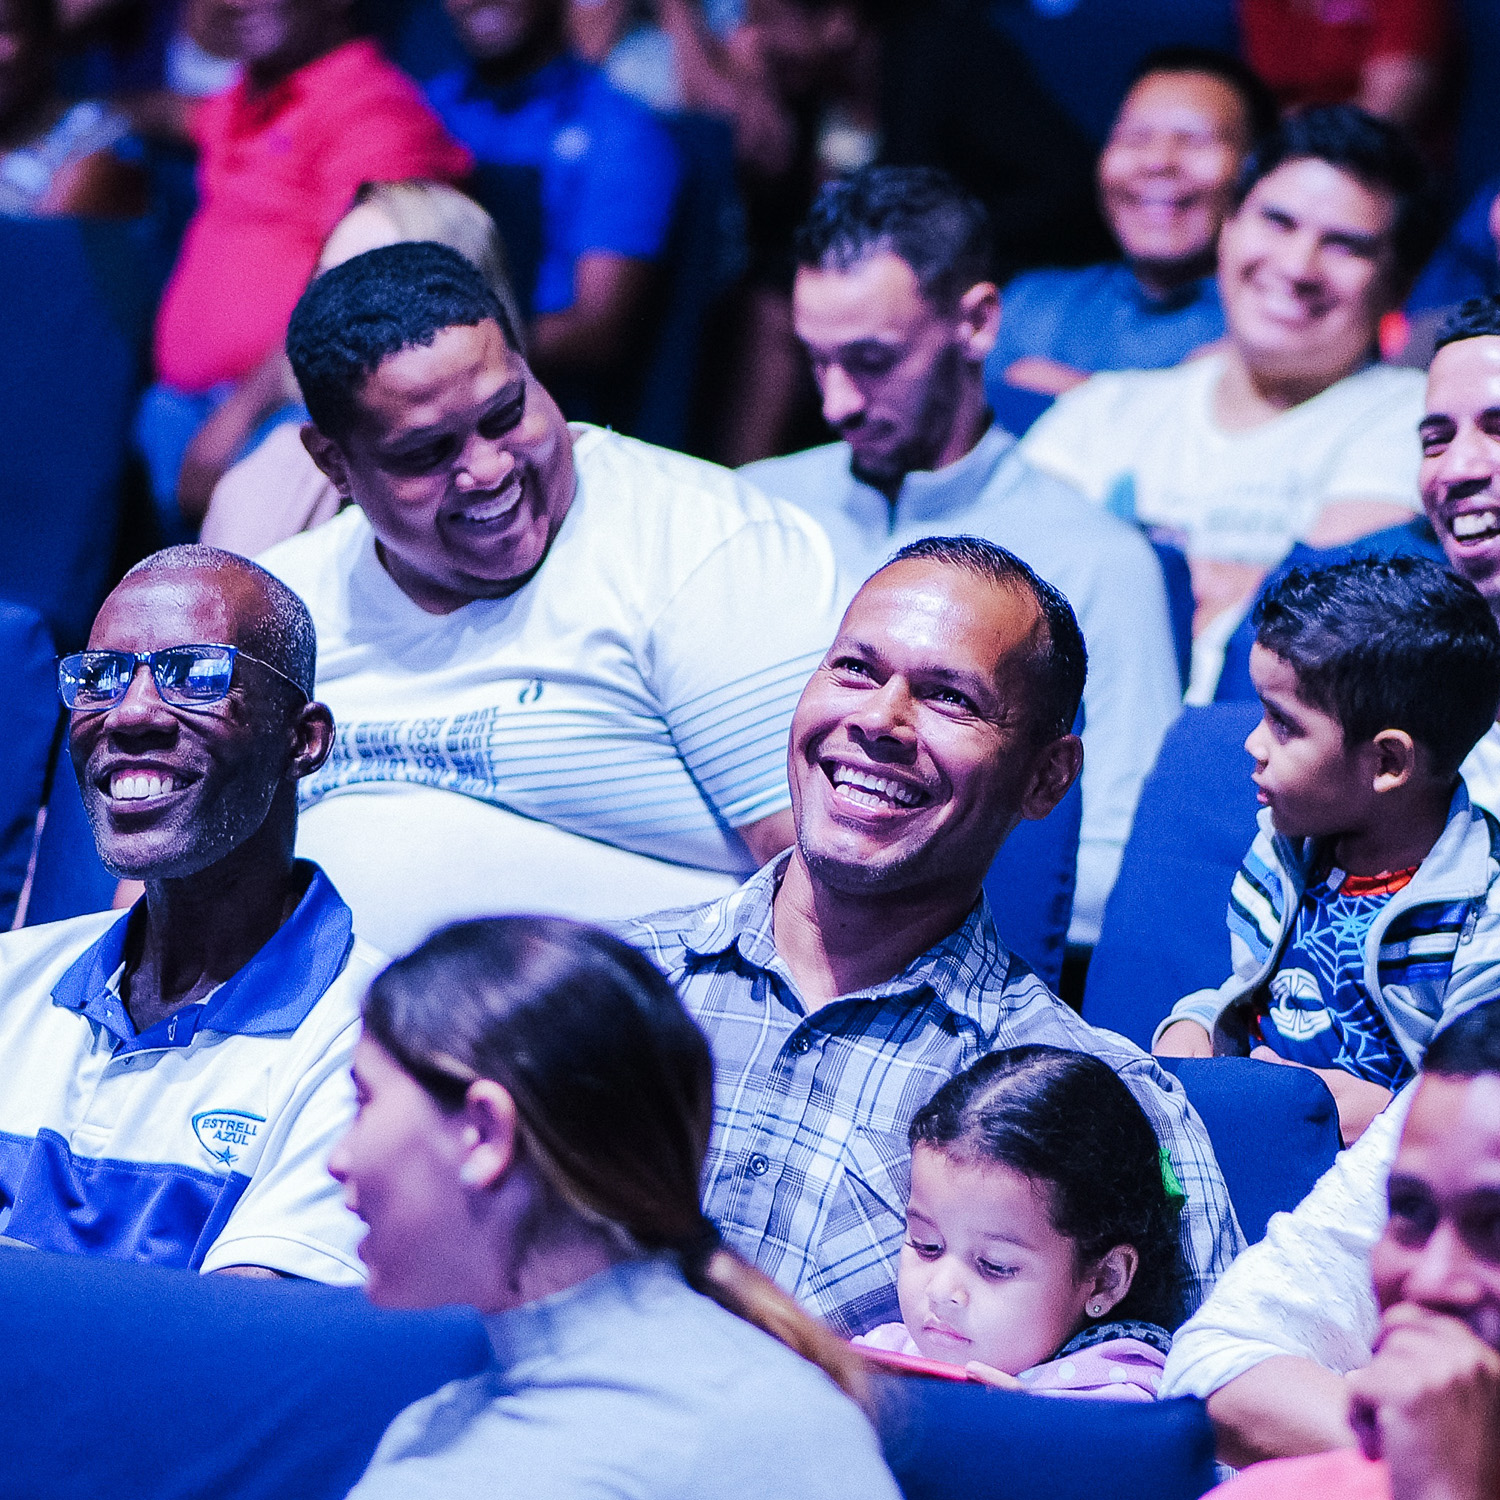 A multiracial crowd of men, women and children sit smiling and laughing in rows of blue upholstered seats.